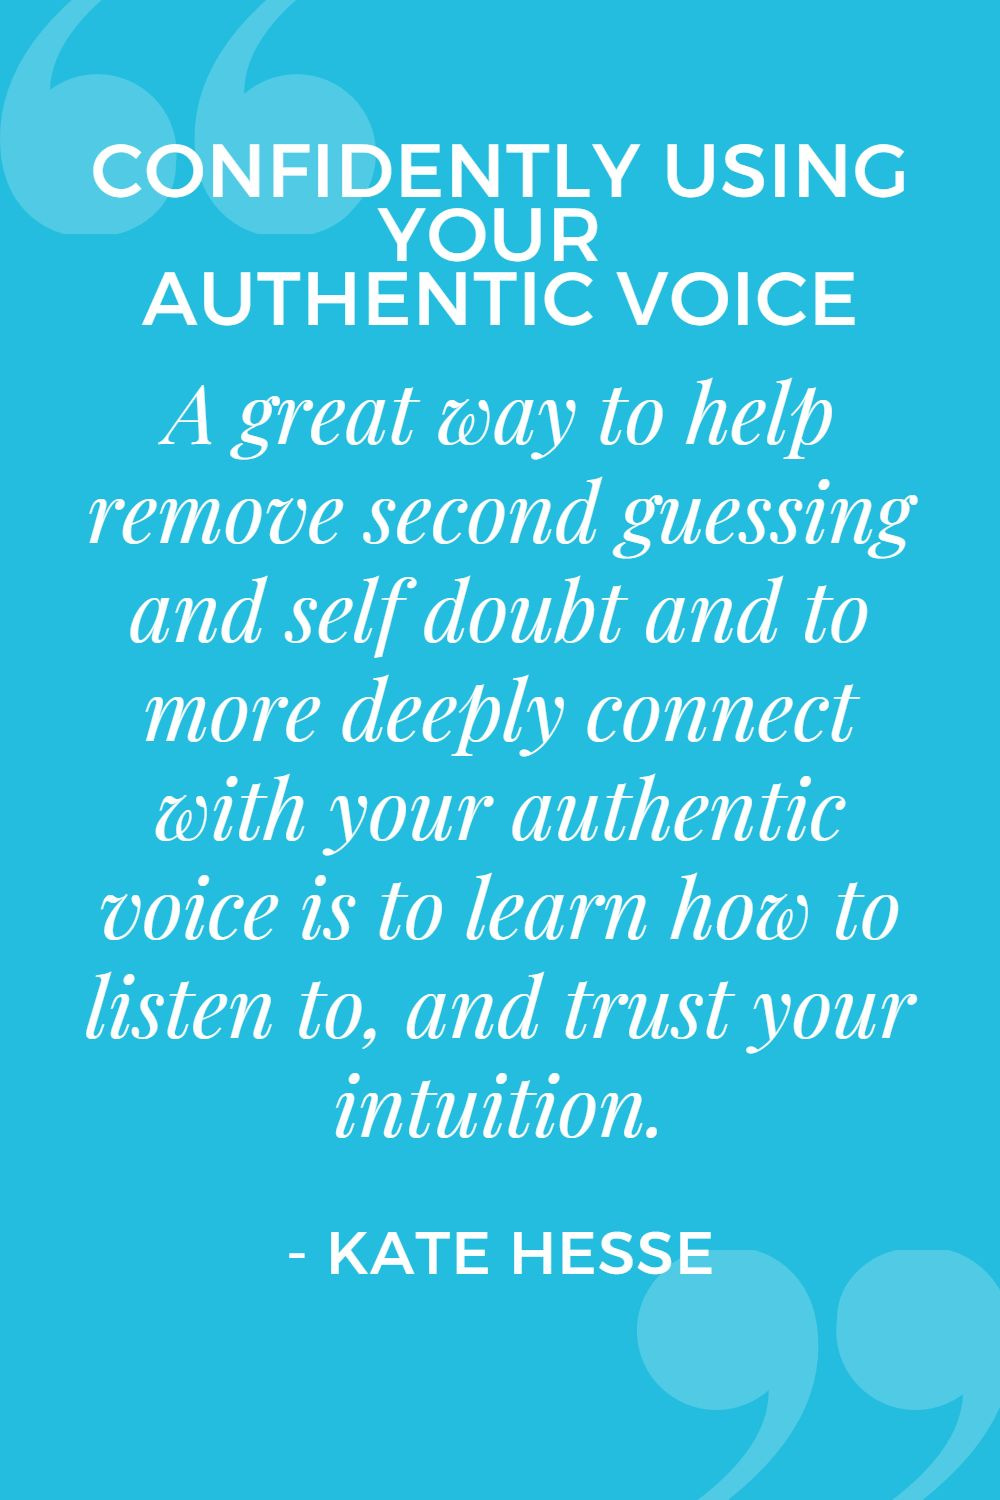 A great way to help remove second guessing and self doubt and to more deeply connect with your authentic voice is to learn how to listen to, and trust your intuition.